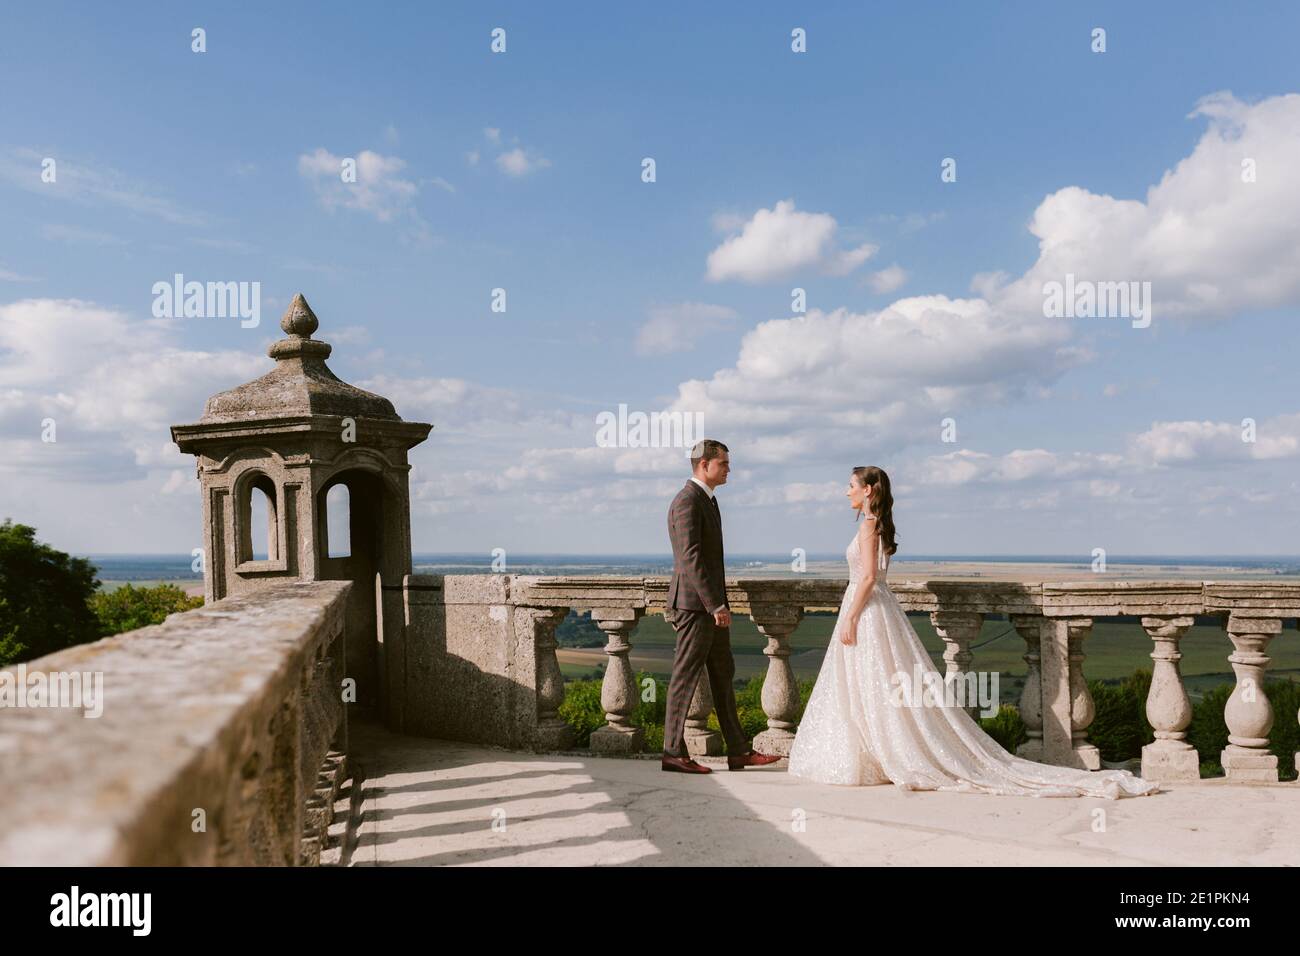 The bride and groom go to meet each other on the terrace of the palace against the sky Stock Photo